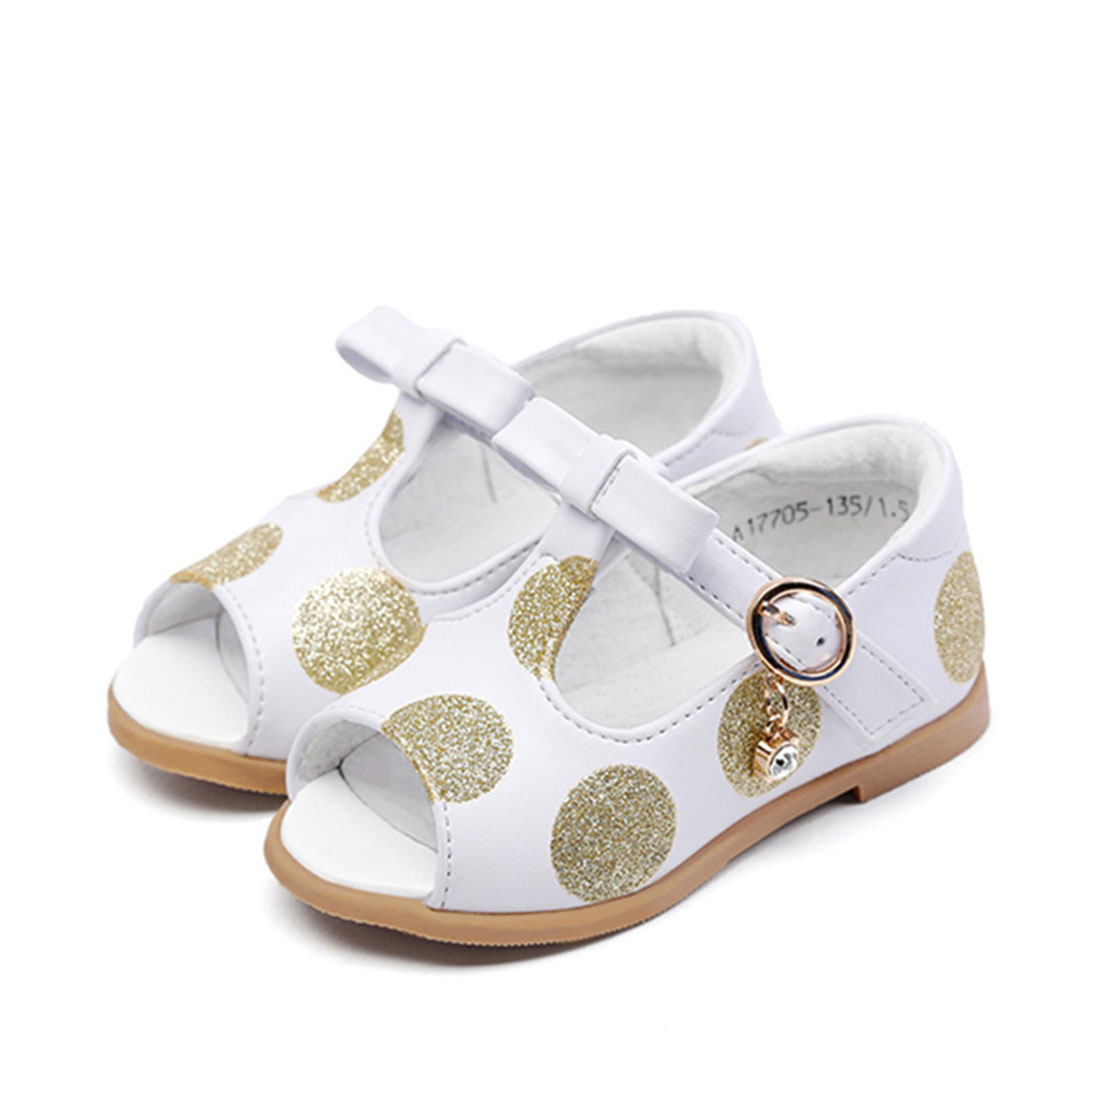 Leather flat peep toe lovely summer with gold polka dots girls sandals shoes